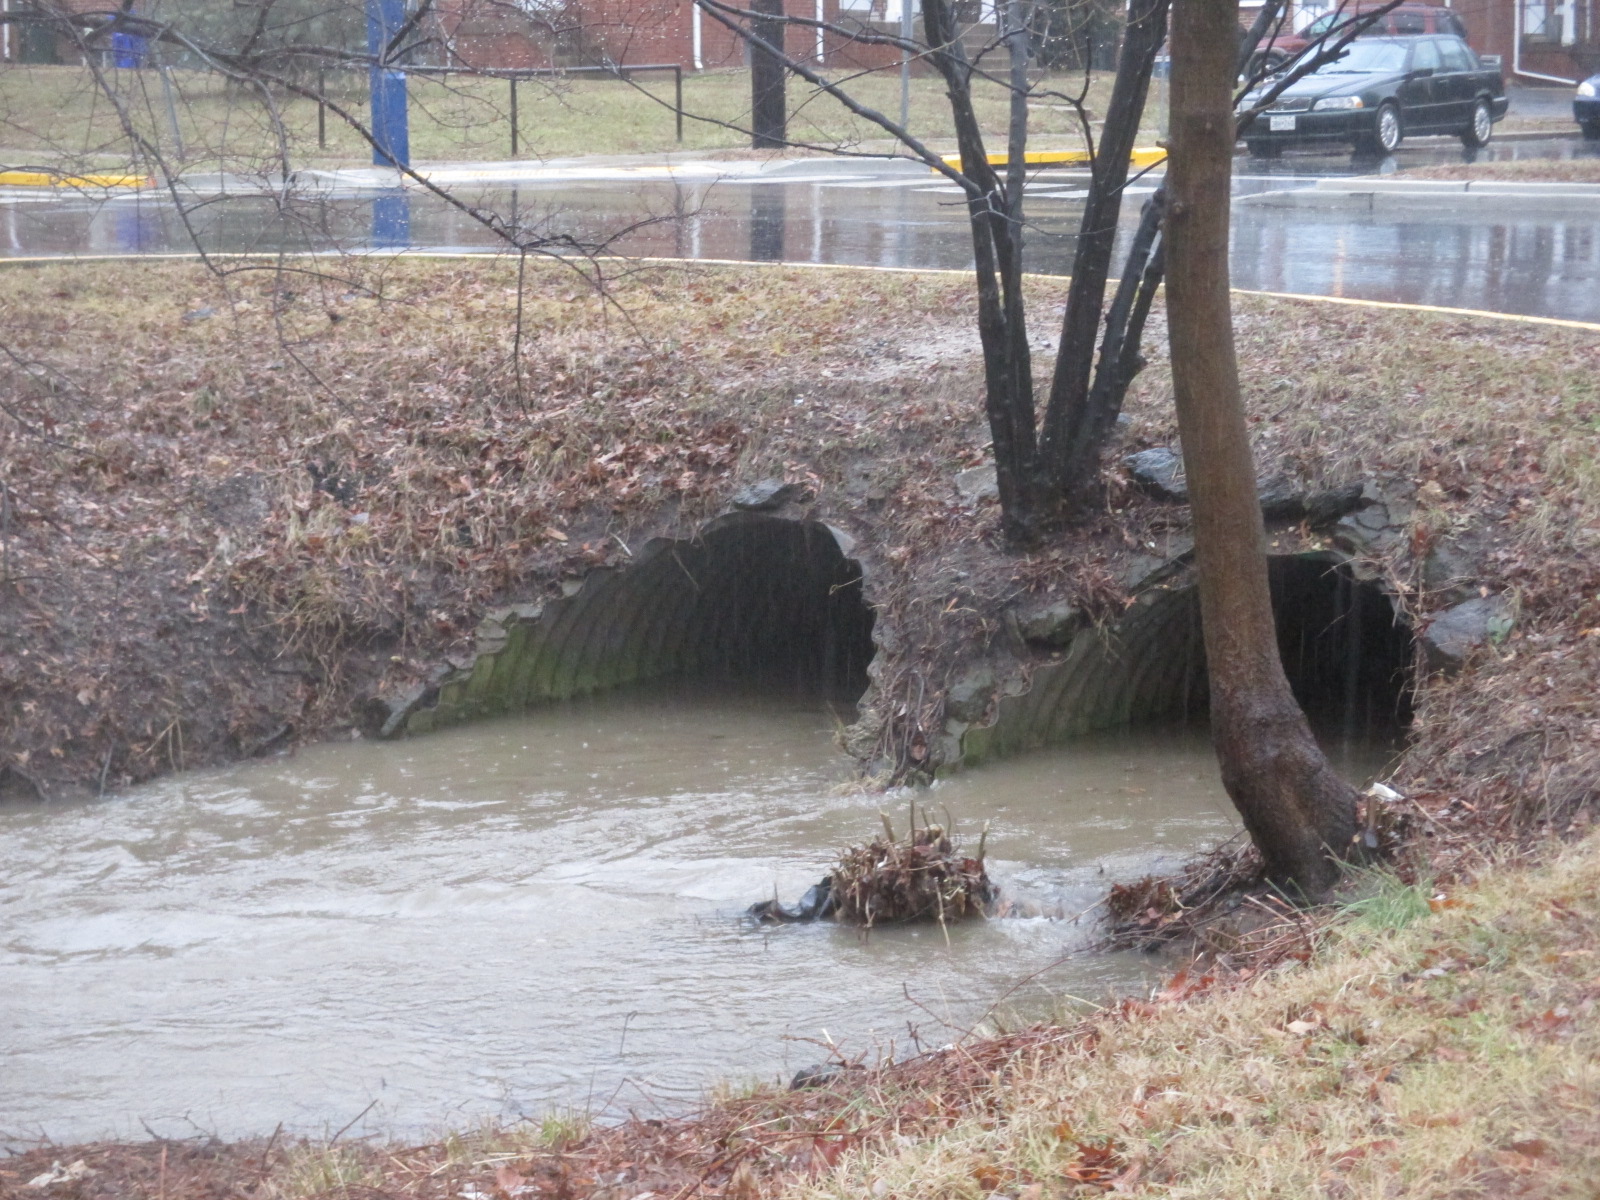 Stormwater drains fill with water after a heavy rain.